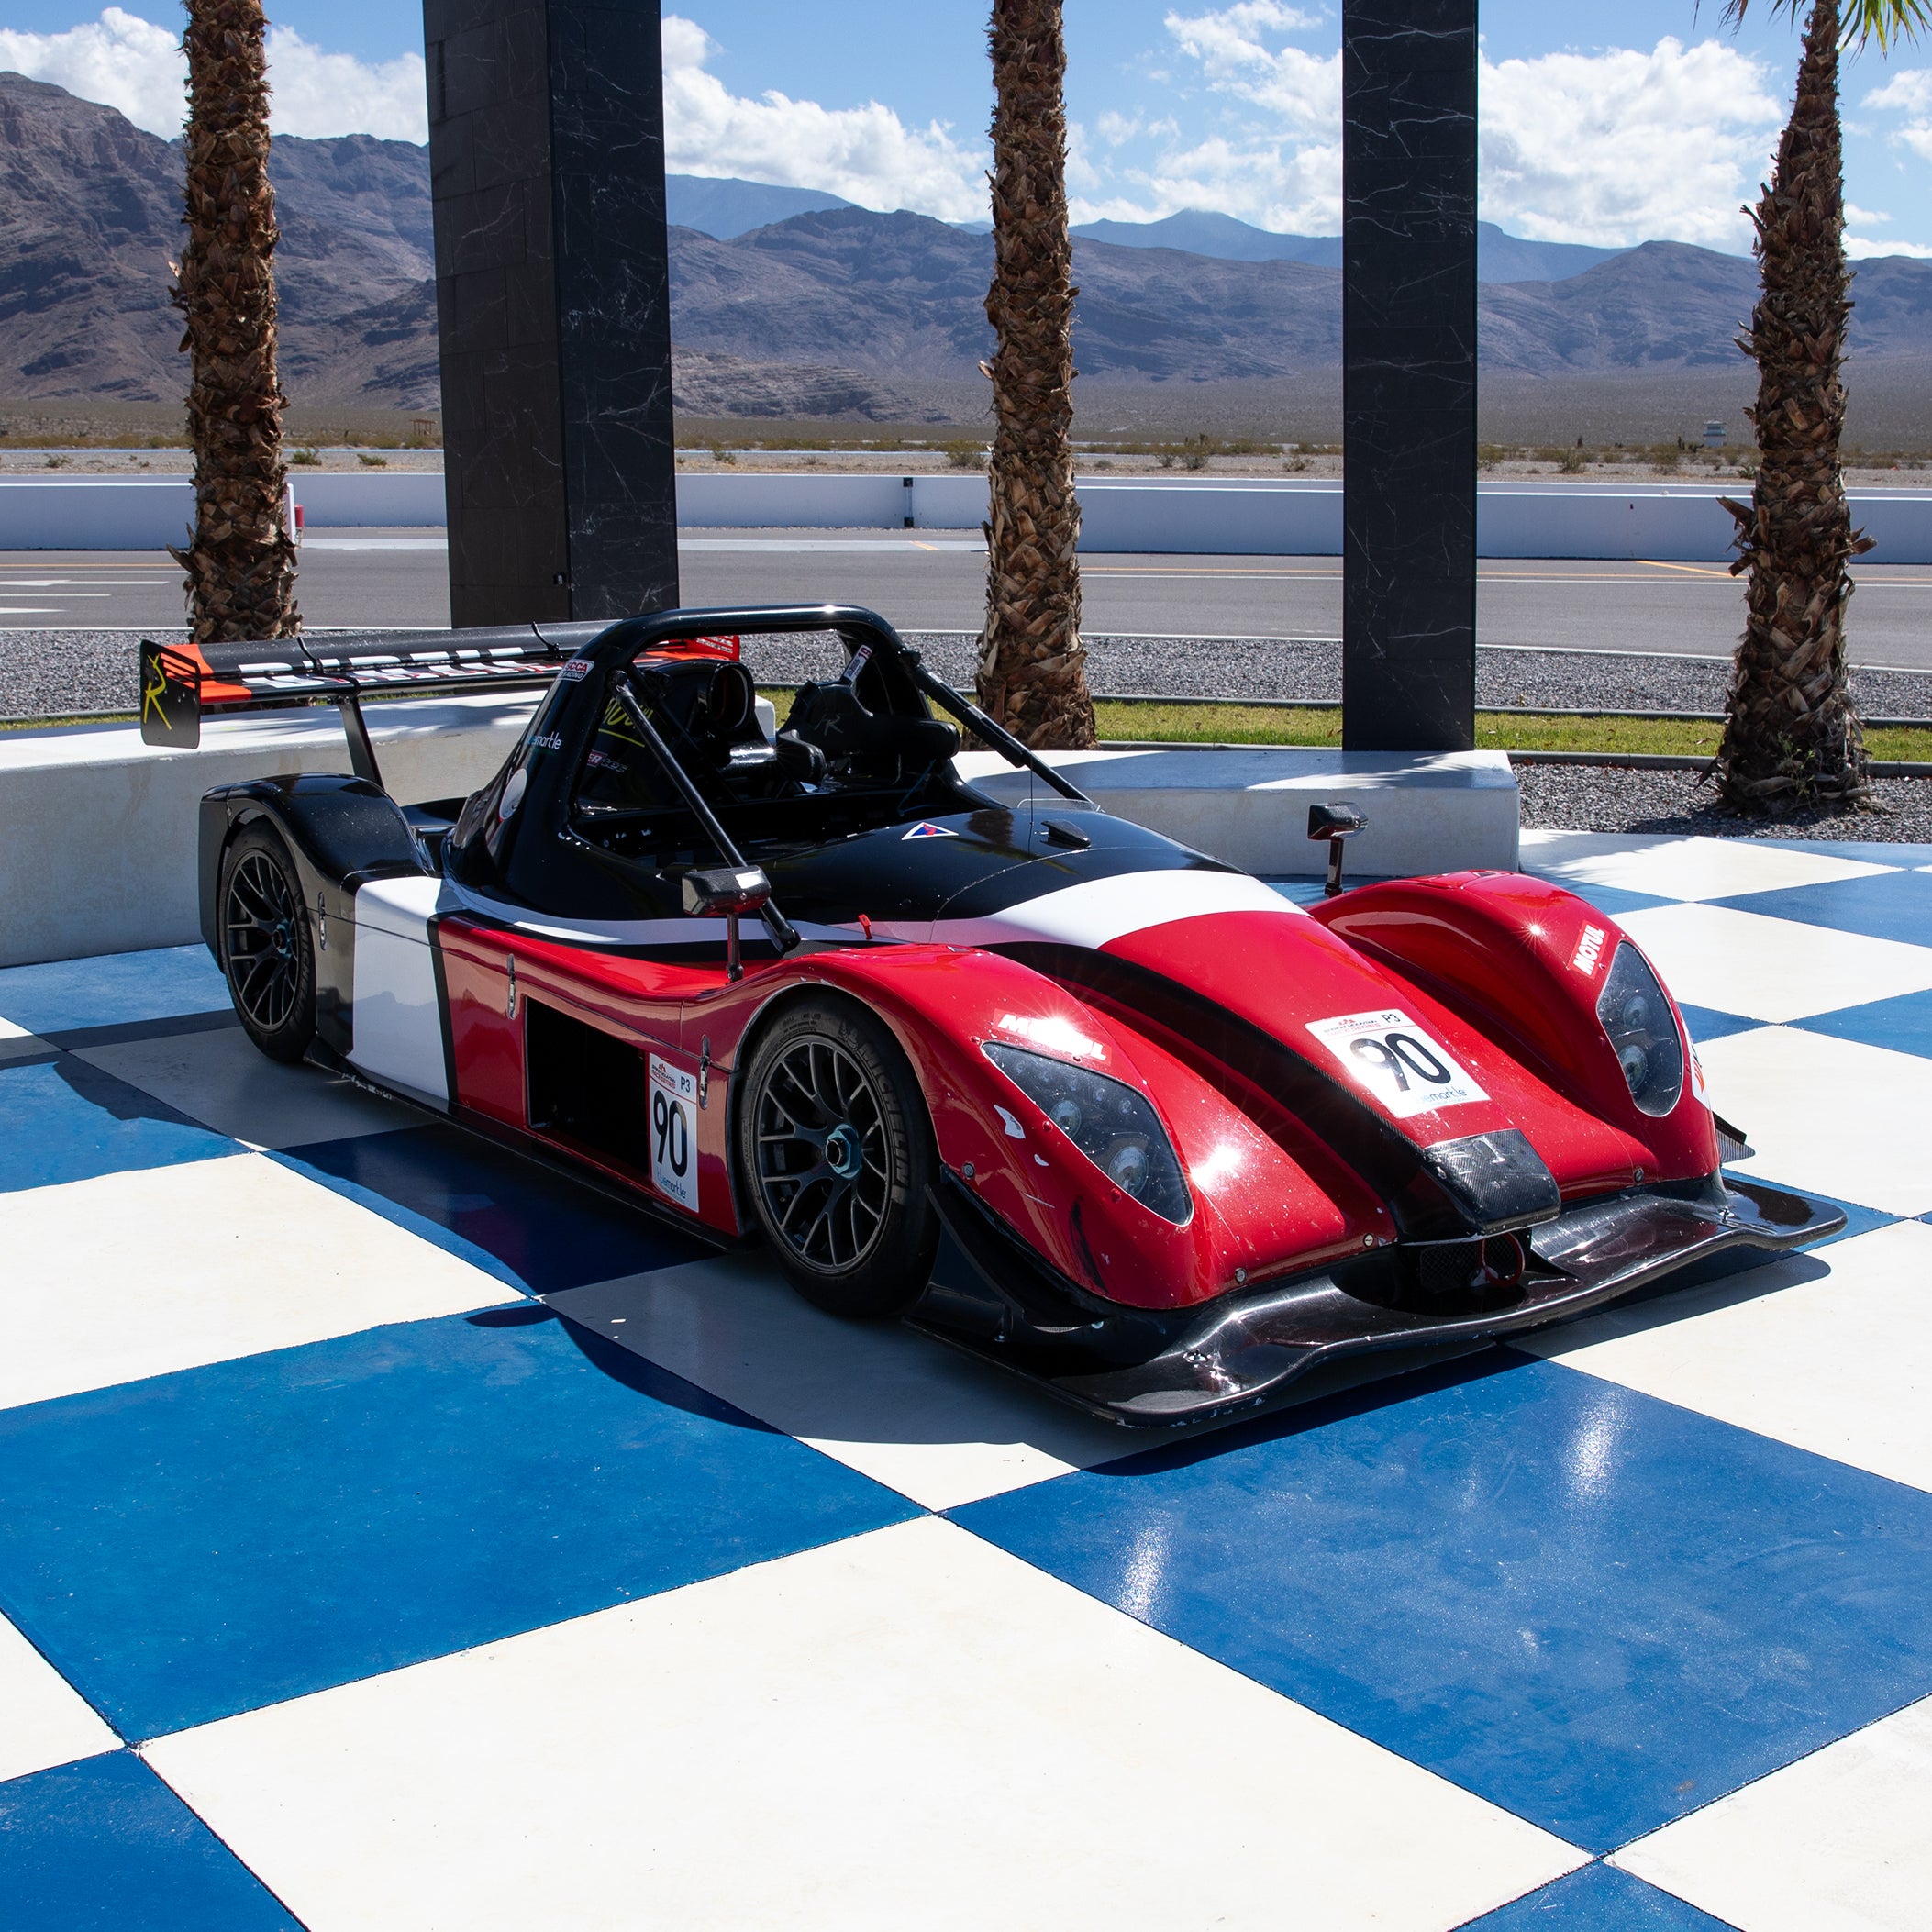 2015 Radical SR3RSX 1500cc Left Hand Drive with Low Engine Hours